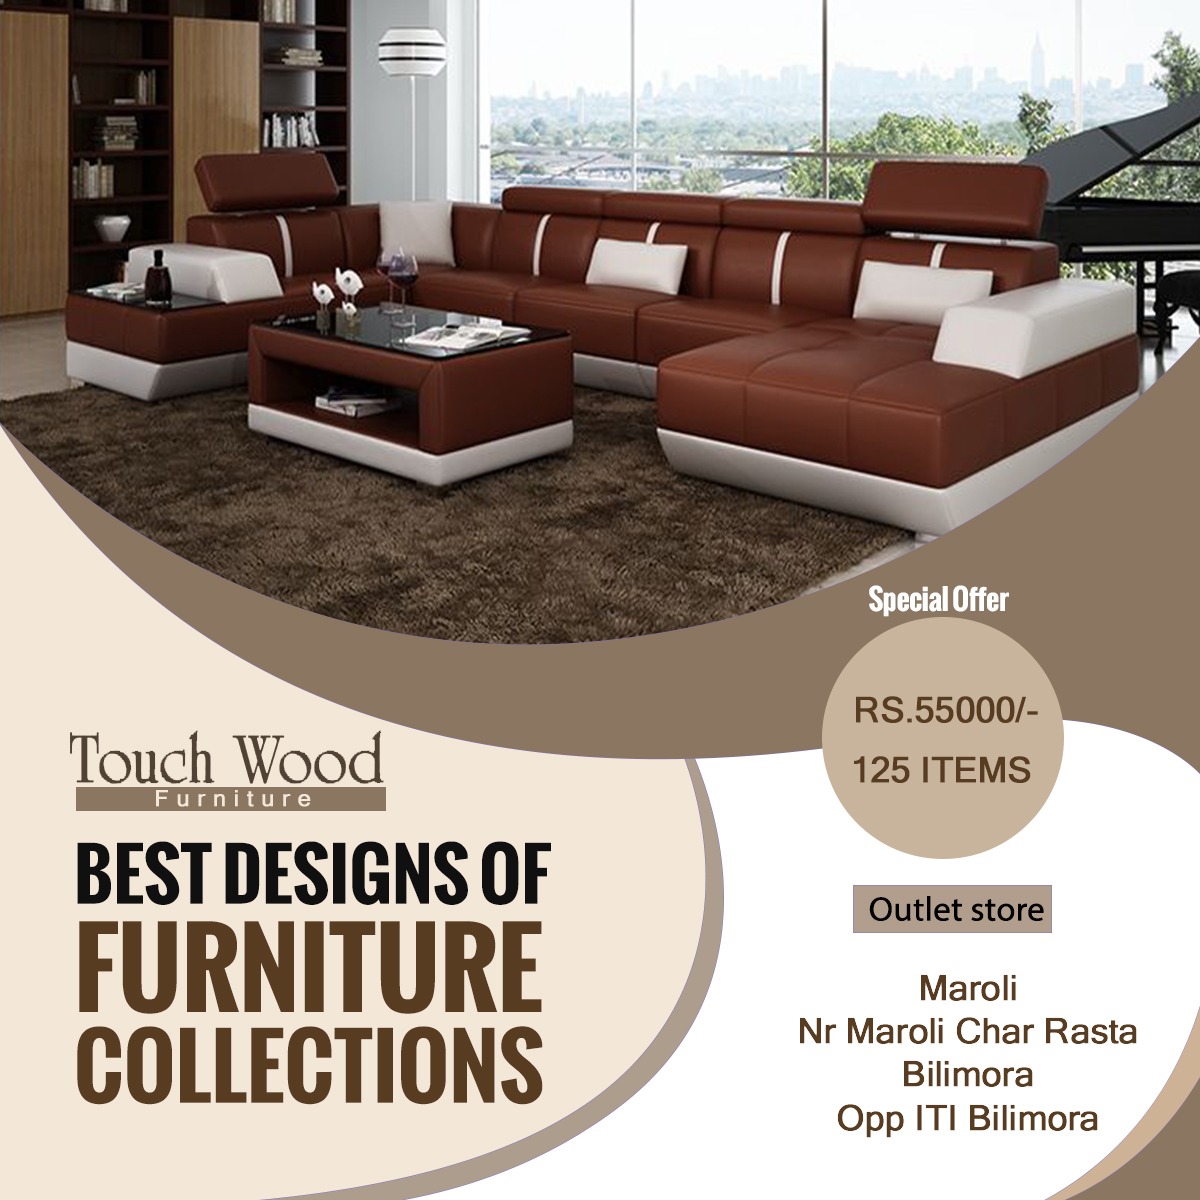 Touch Wood Kanyadaan Furniture Set 125 Items